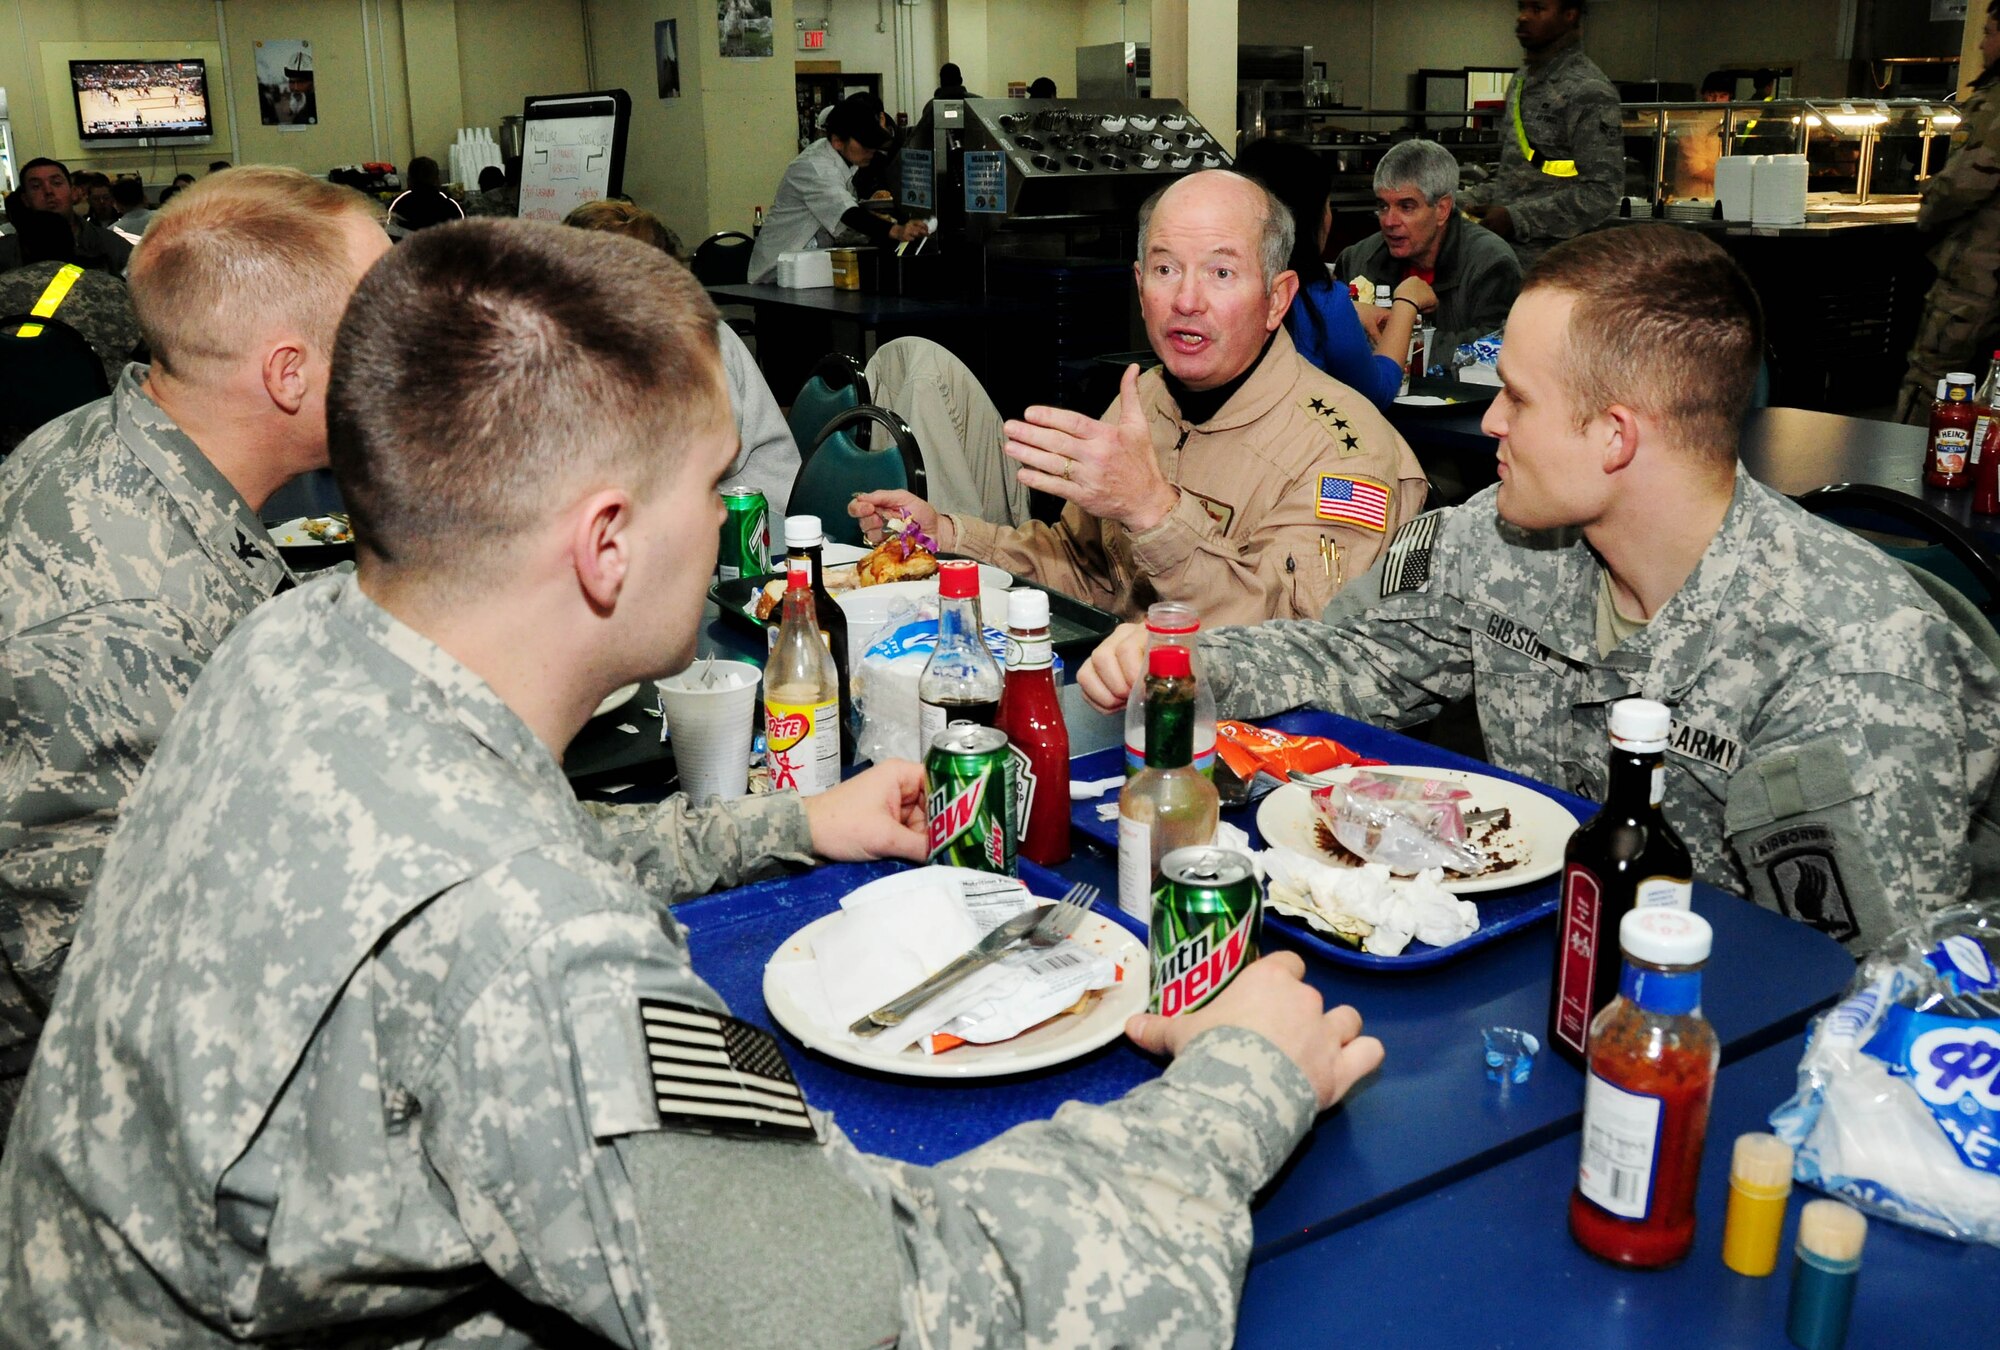 General Duncan J. McNabb, U.S. Transportation Command commander, and Col. Blaine Holt, 376th Air Expeditionary Wing commander, speak with Army Spc. Louis Schuster and Pfc. Jonathon Gibson, field artillery specialists from the 4-319 Airborne Field Artillery Regiment Bamberg, Germany Army Post, over dinner at the Transit Center at Manas' Ala' too Dining Facility here Jan. 16. The soldiers are transiting home from Forward Operating Base Airborne after a 12-month deployment. (U.S. Air Force photo by Senior Airman Nichelle Anderson)